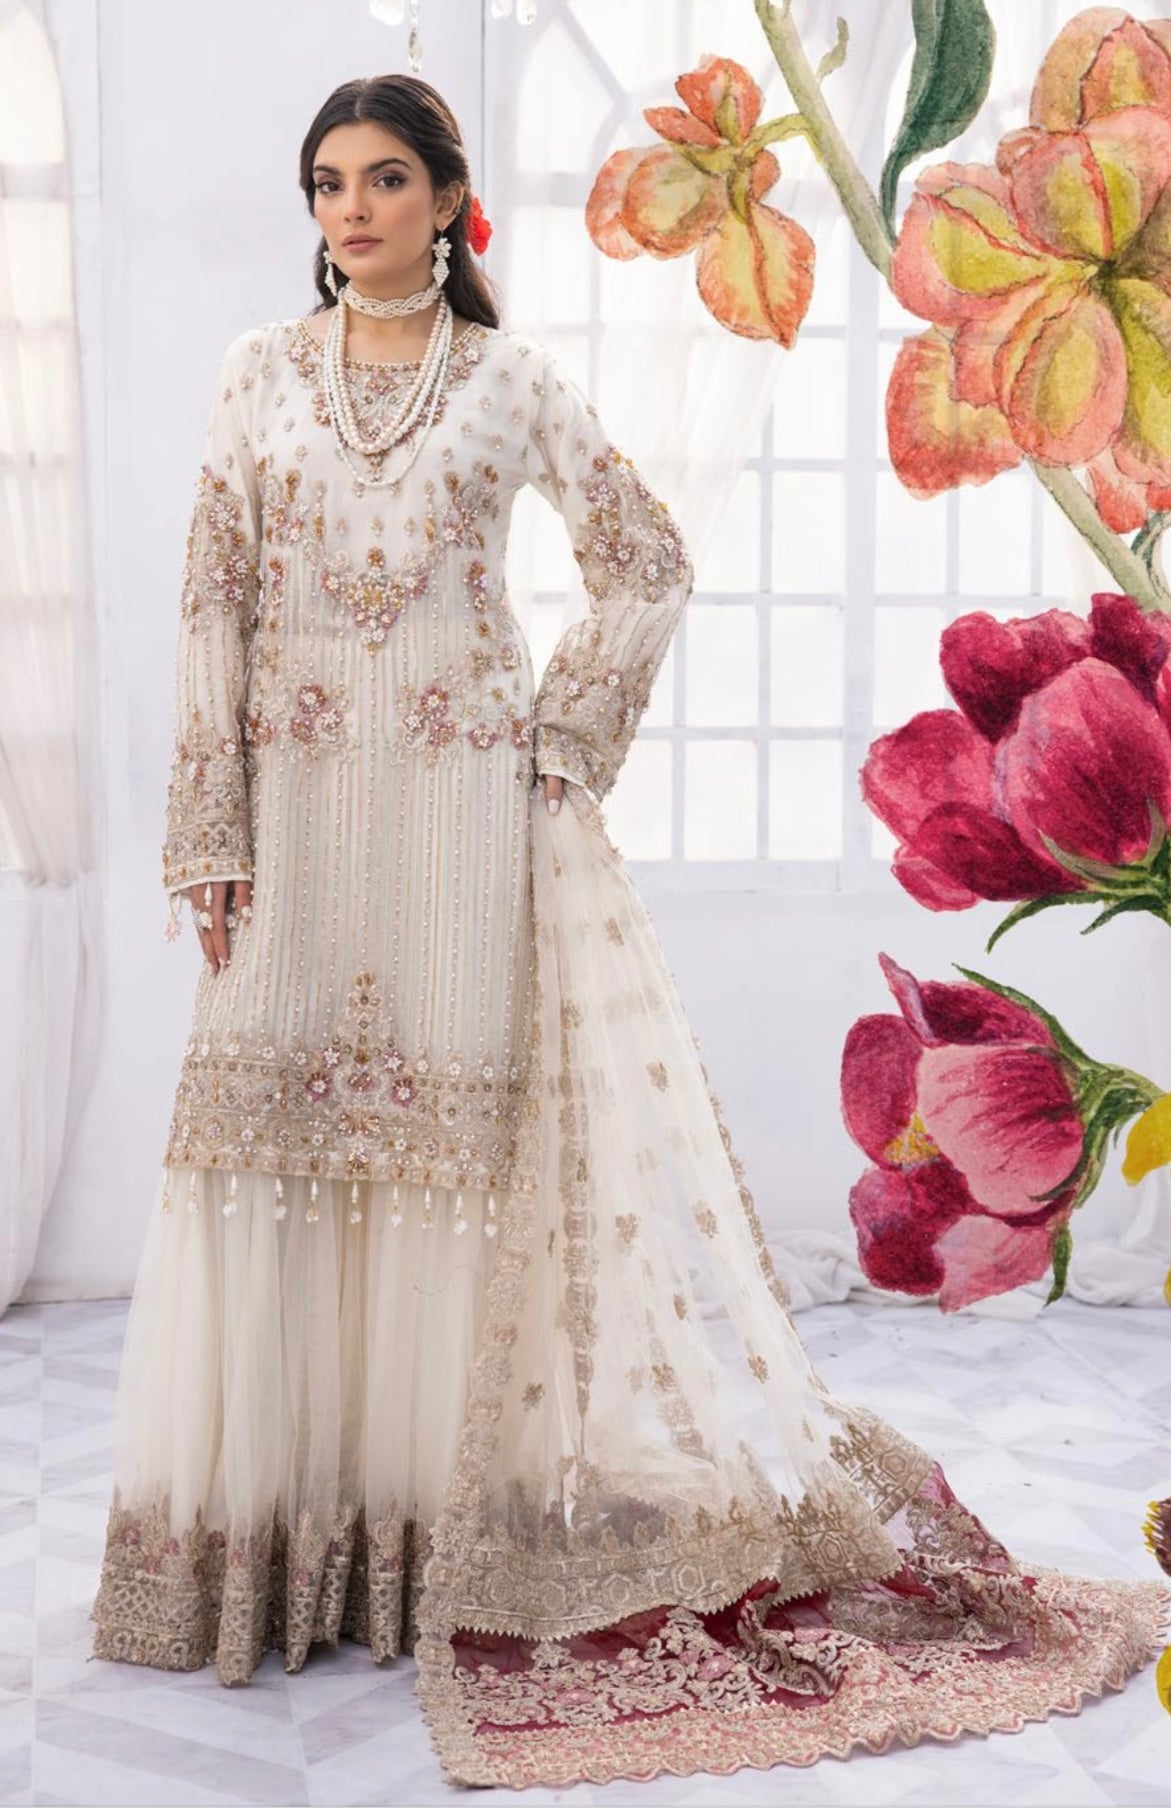 SIMRANS LUXURY Premium Embroidered 3 Piece Lilac Wedding Outfit LCR:9014